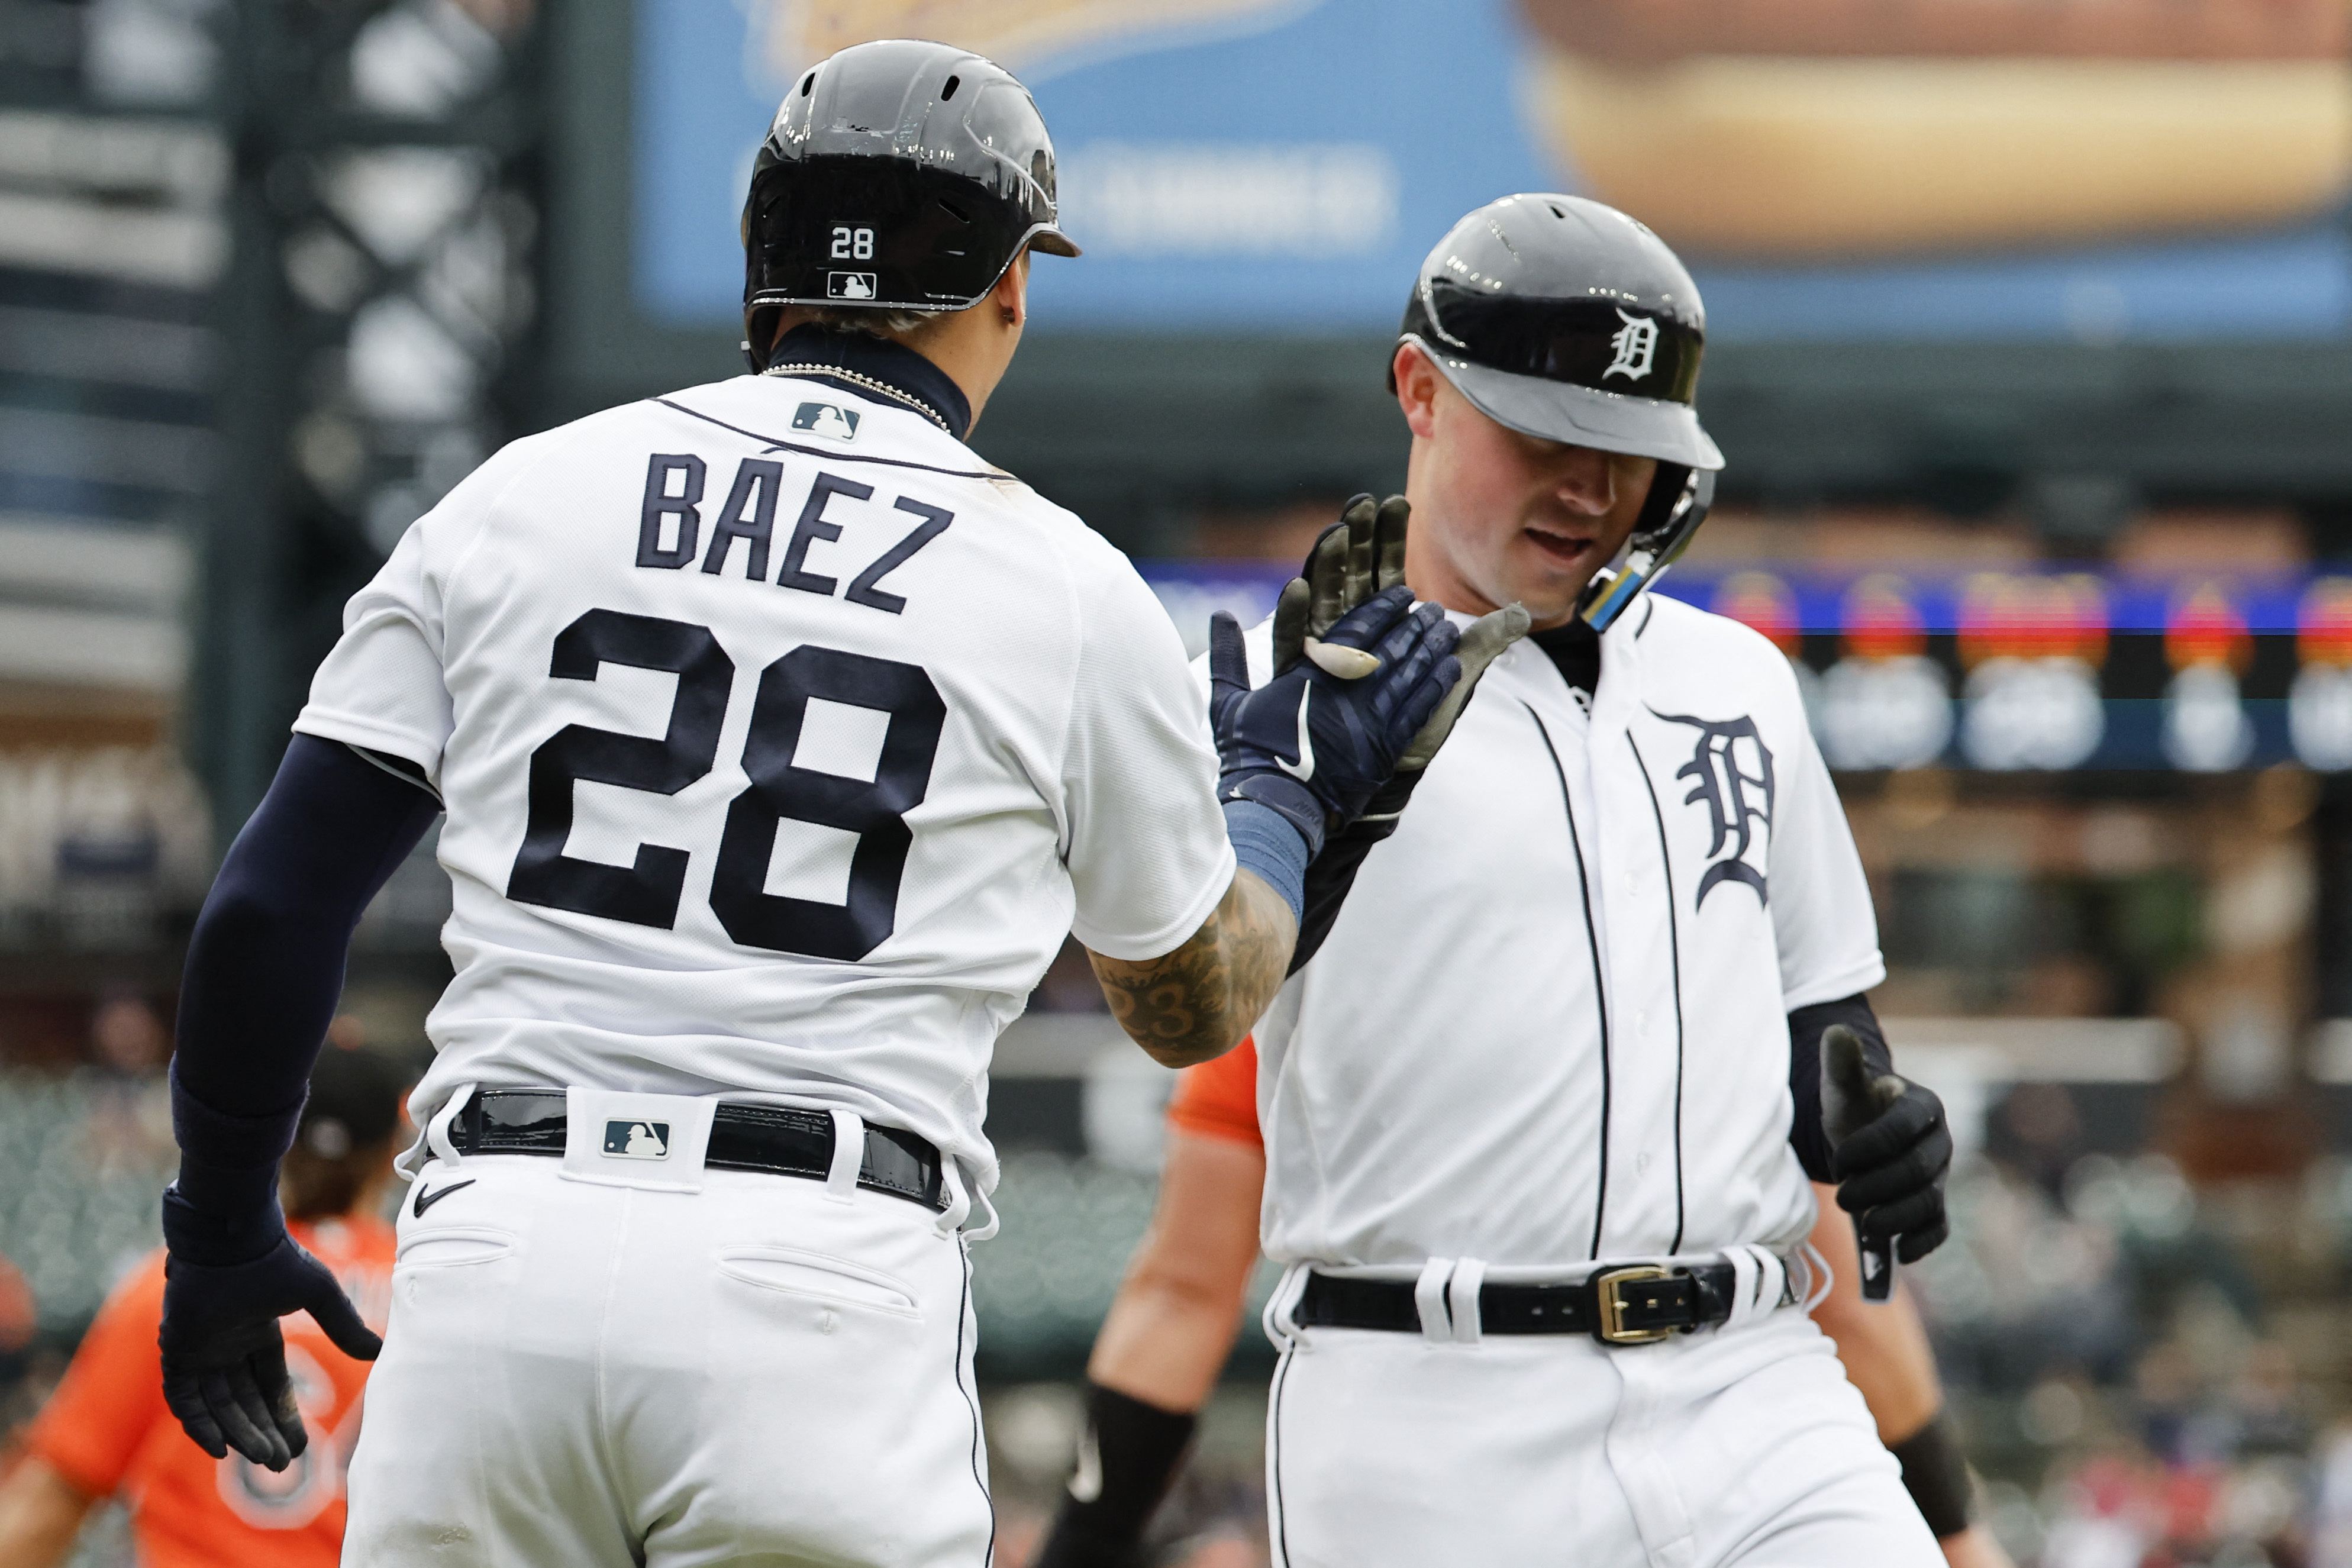 Tigers split doubleheader with Orioles